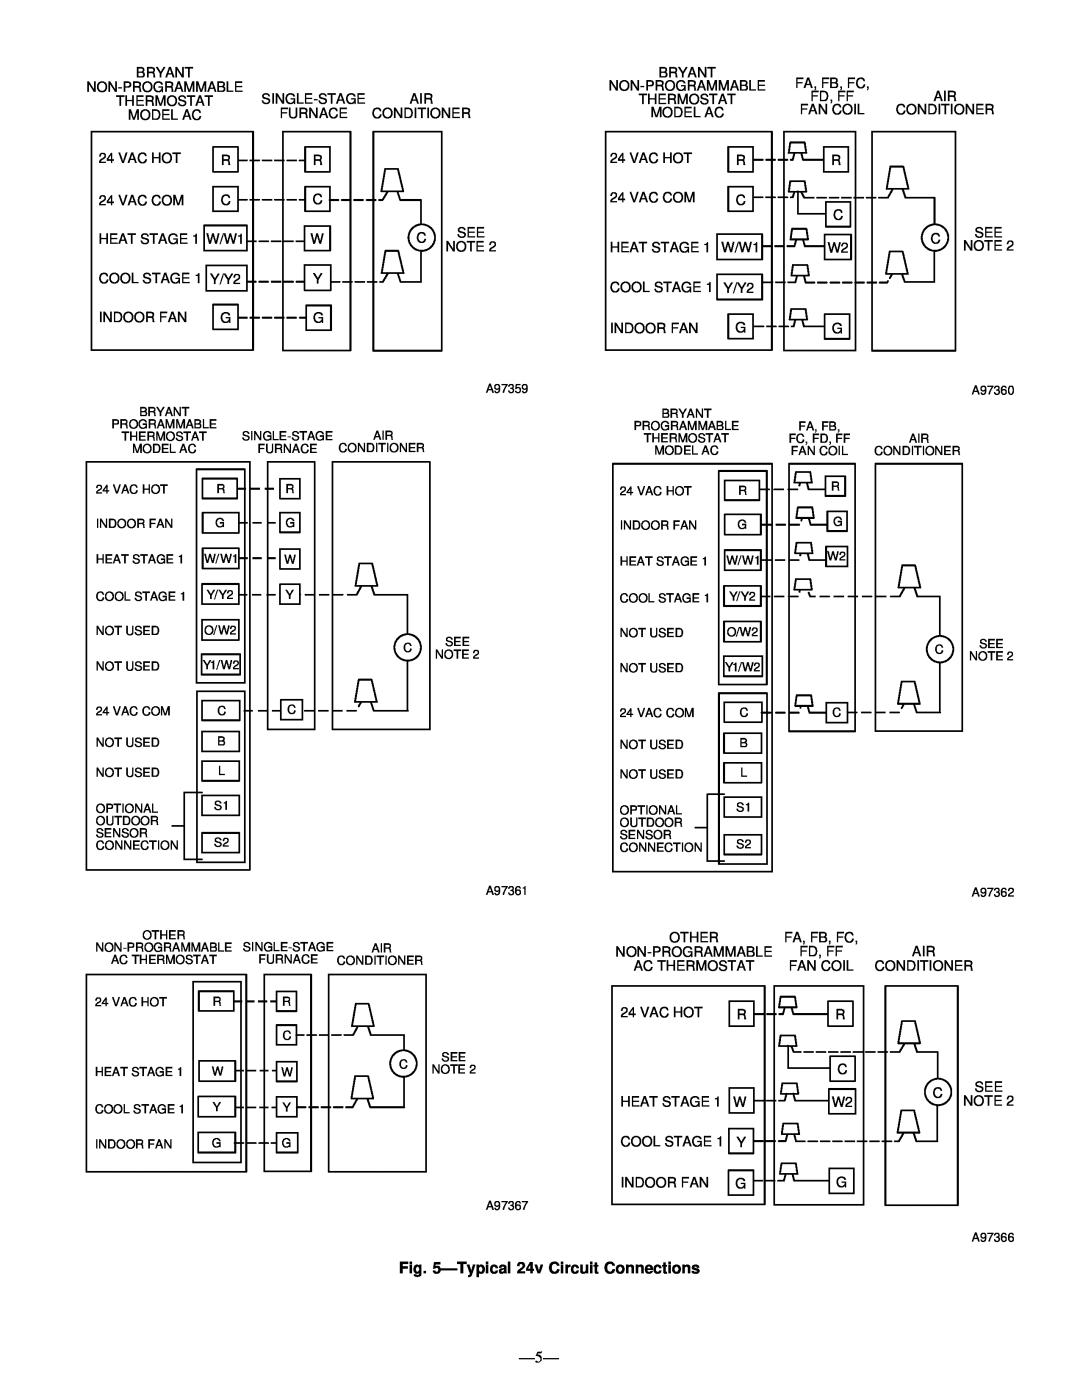 Bryant 597C instruction manual Typical24v Circuit Connections 